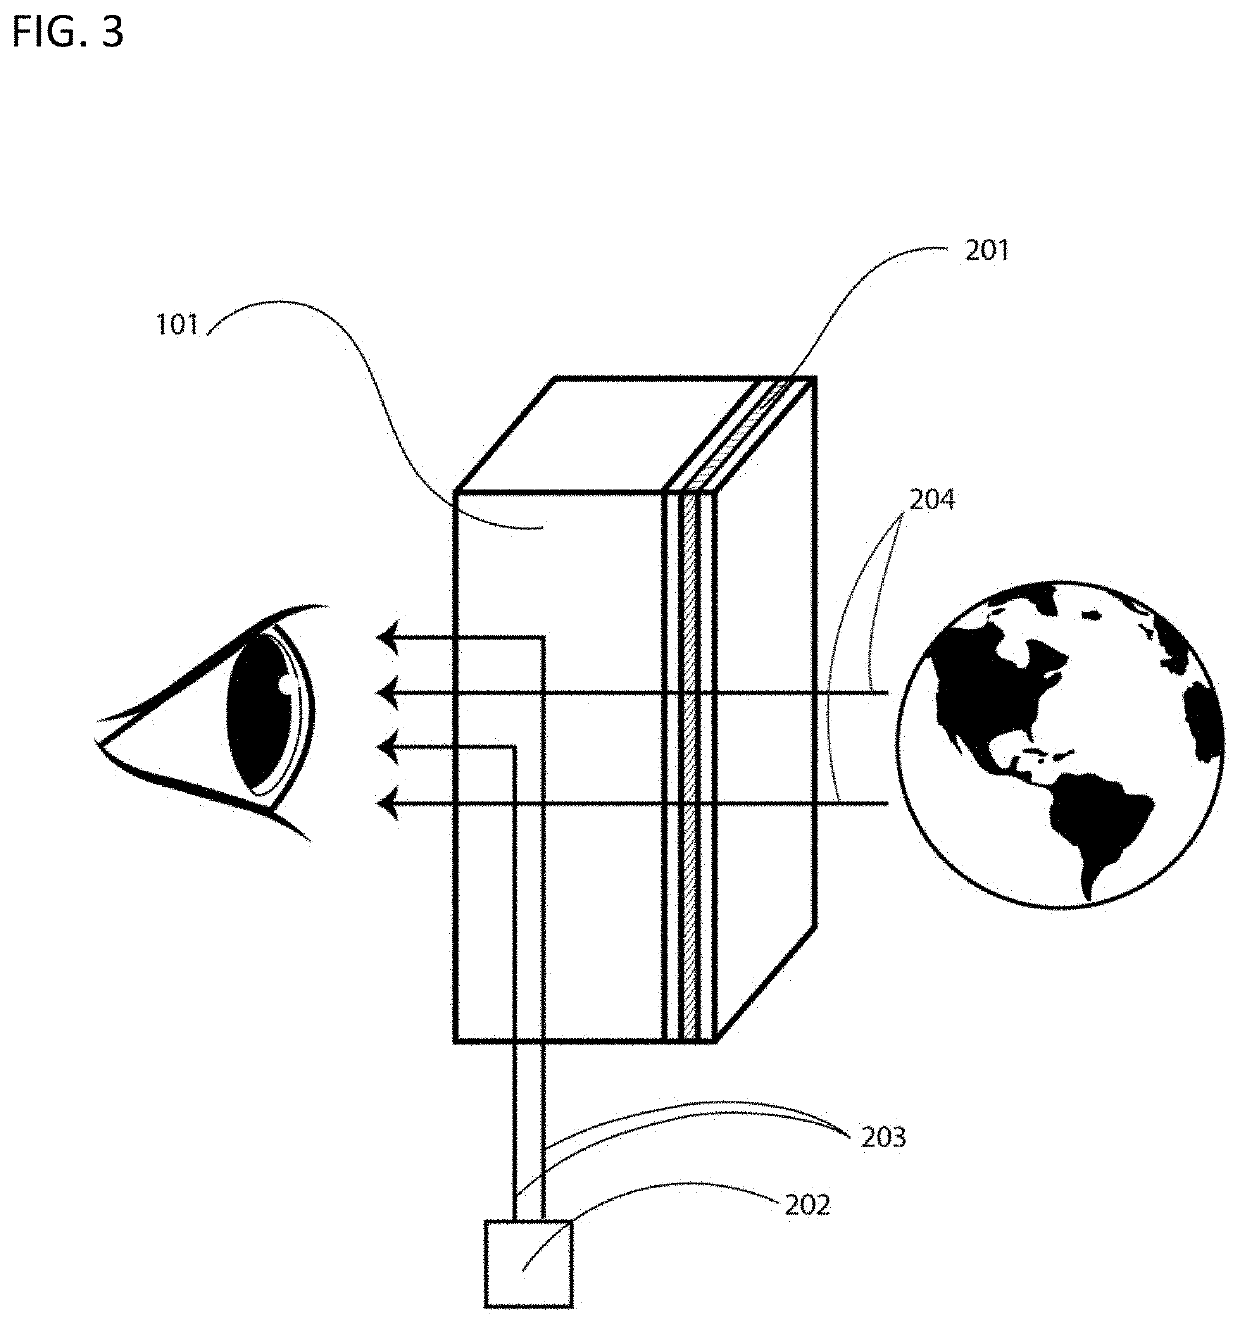 Optical layered composite having a reduced content of highly refractive layers and its application in augmented reality